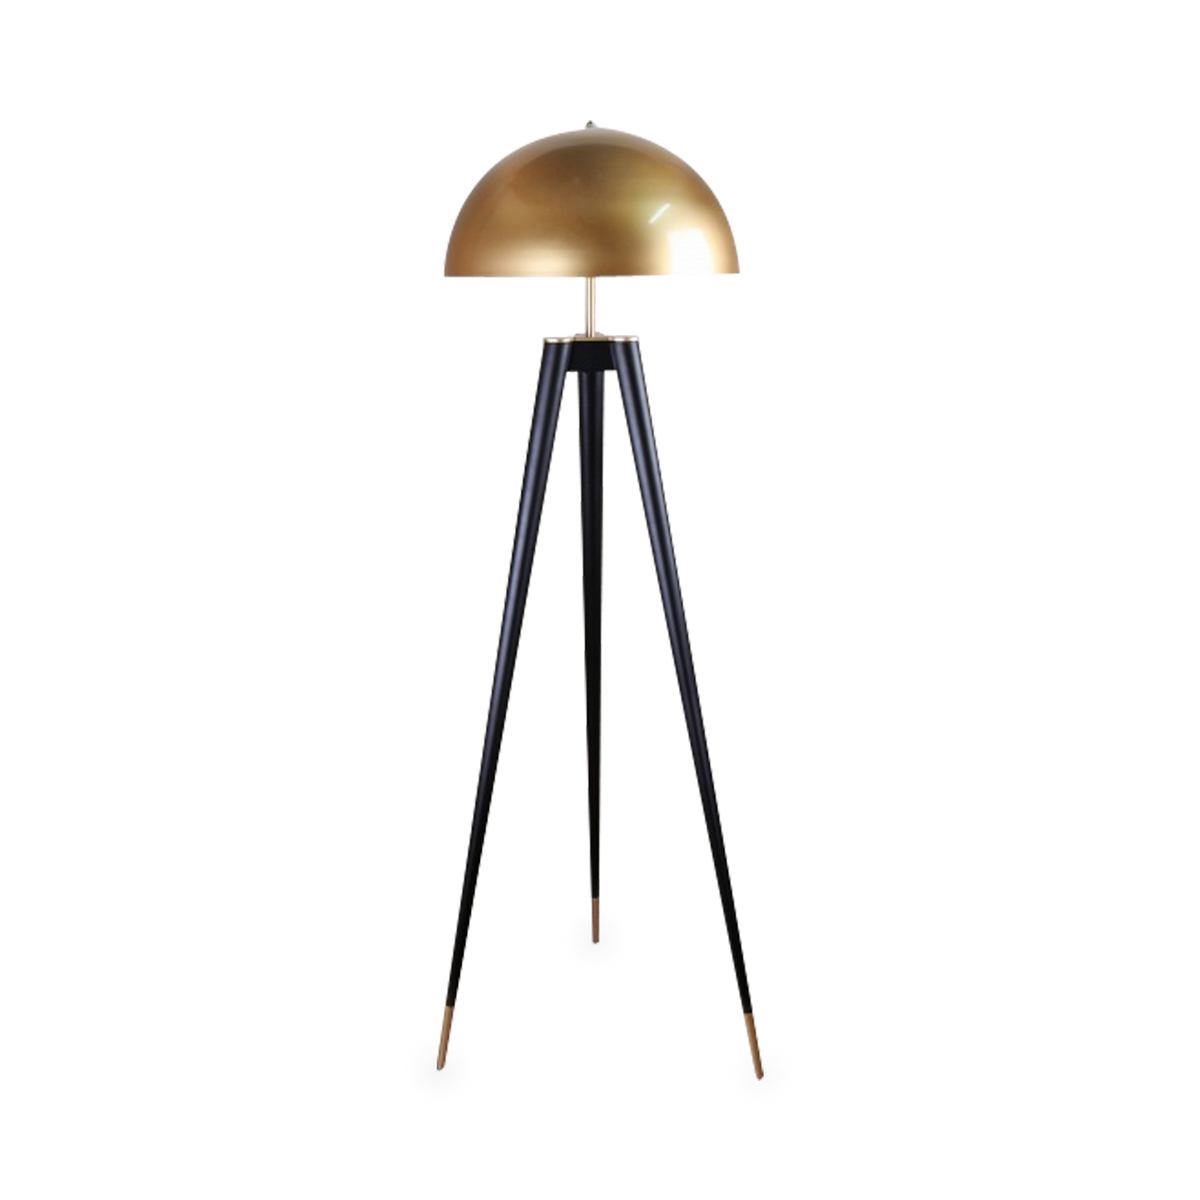 A bold yet thoughtful design, Helmut features a black metal tripod base topped with a domed shade finished in rich gold.